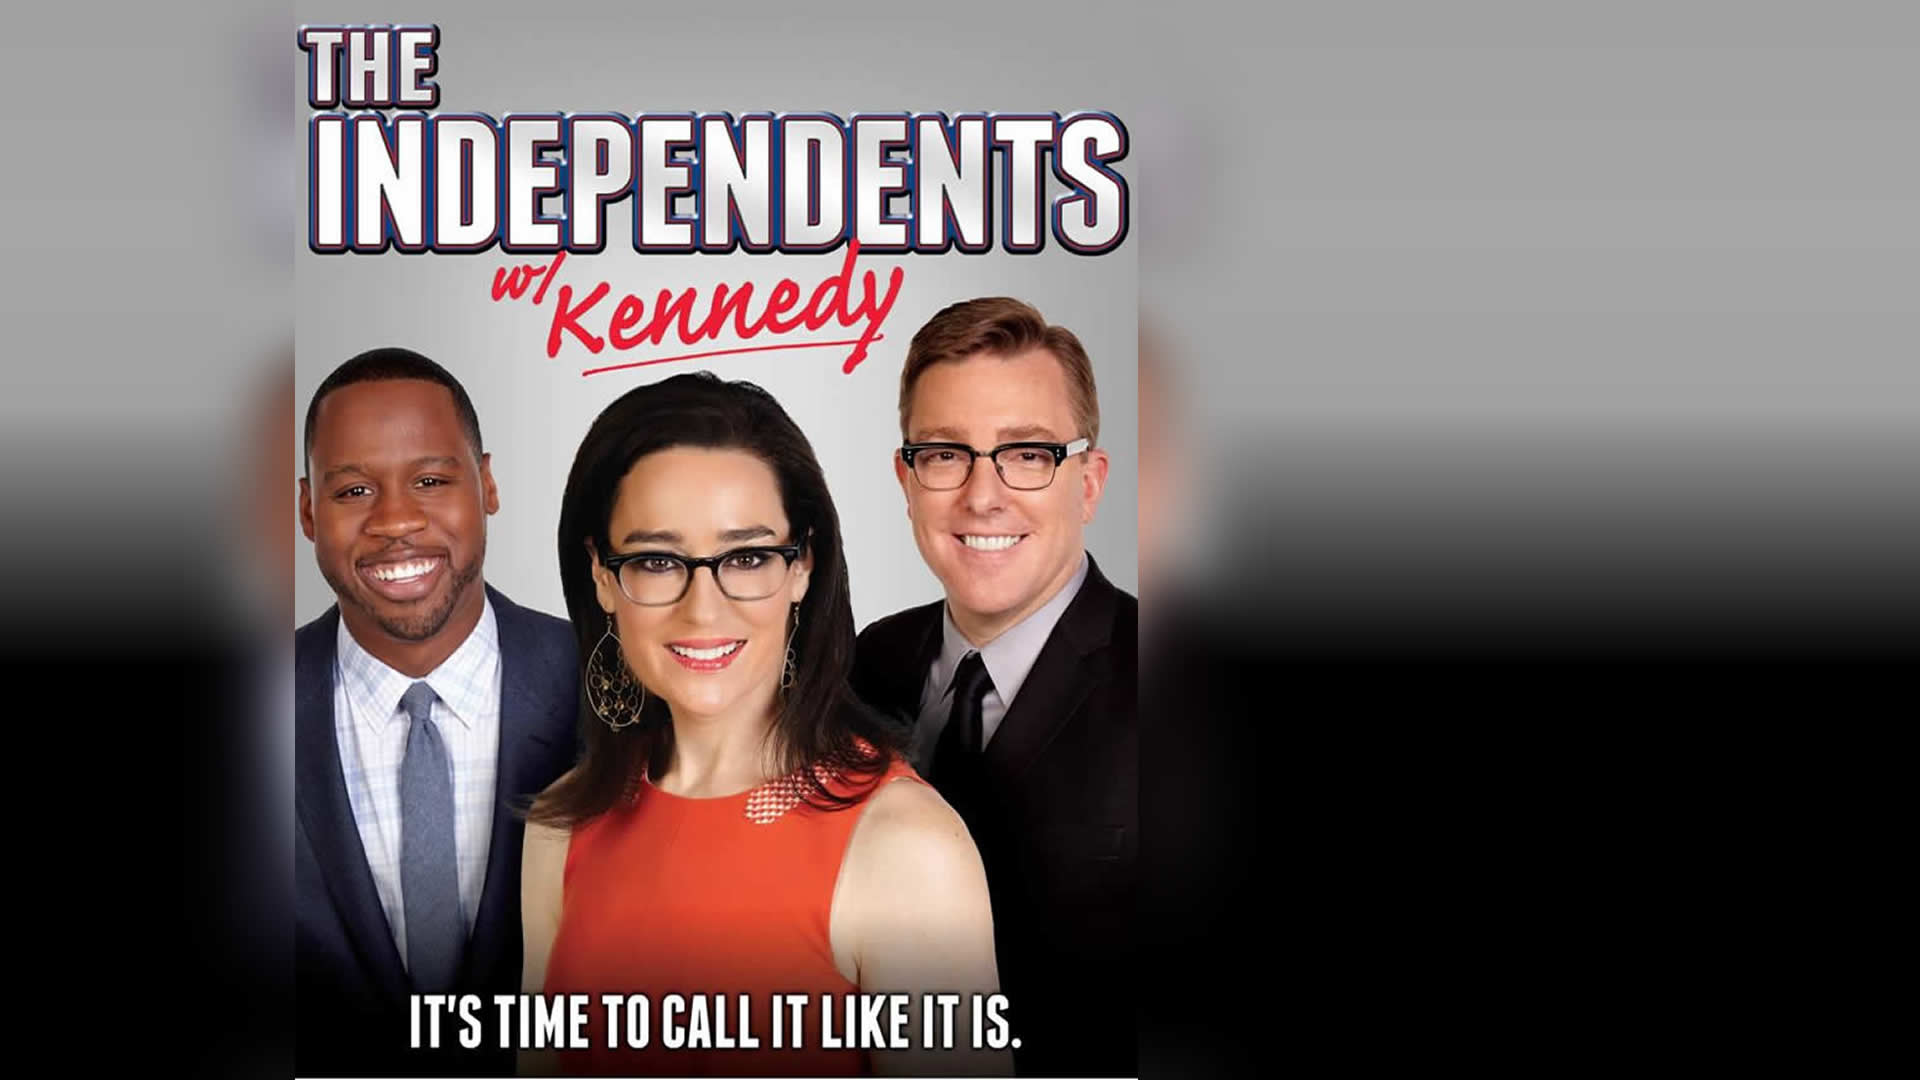 The Independents (TV Series 2013 - 2015)